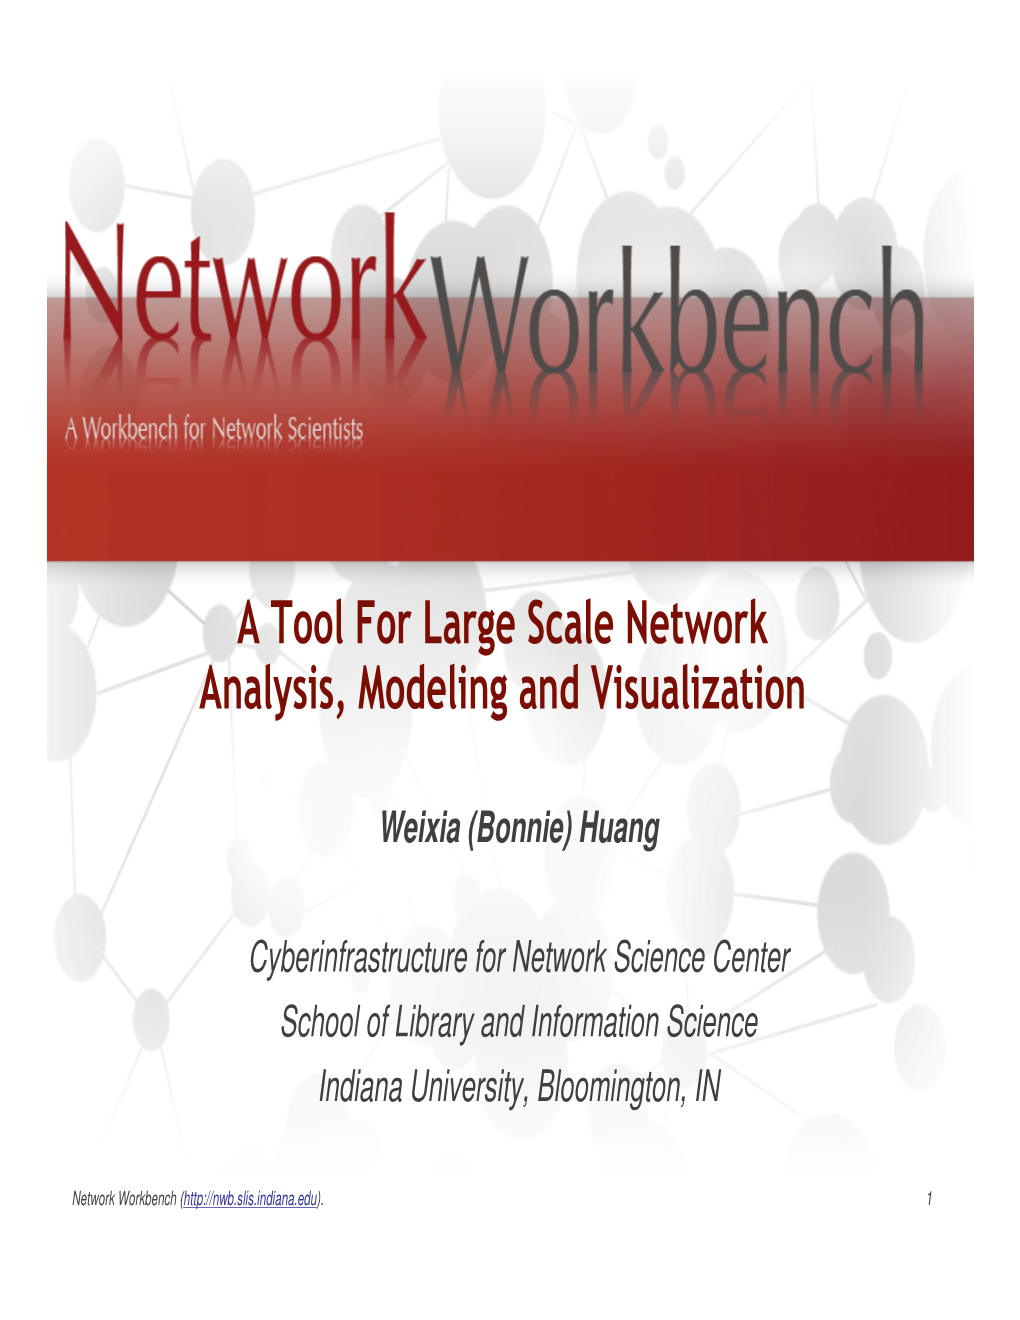 A Tool for Large Scale Network Analysis, Modeling and Visualization